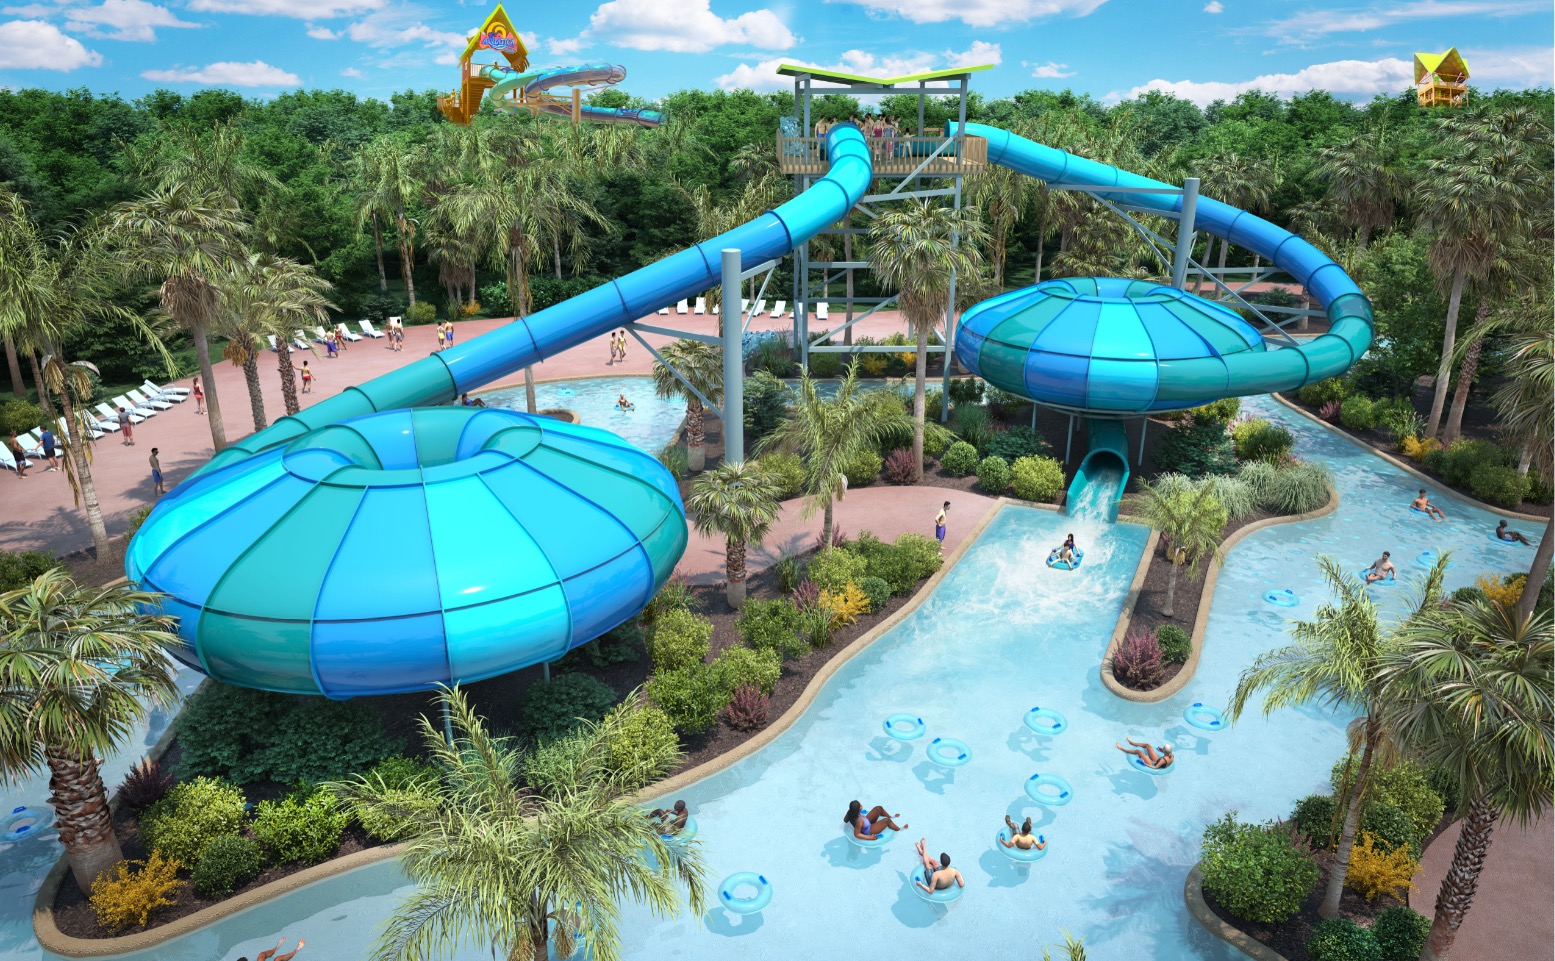 New Underwater Slide To Debut At Aquatica